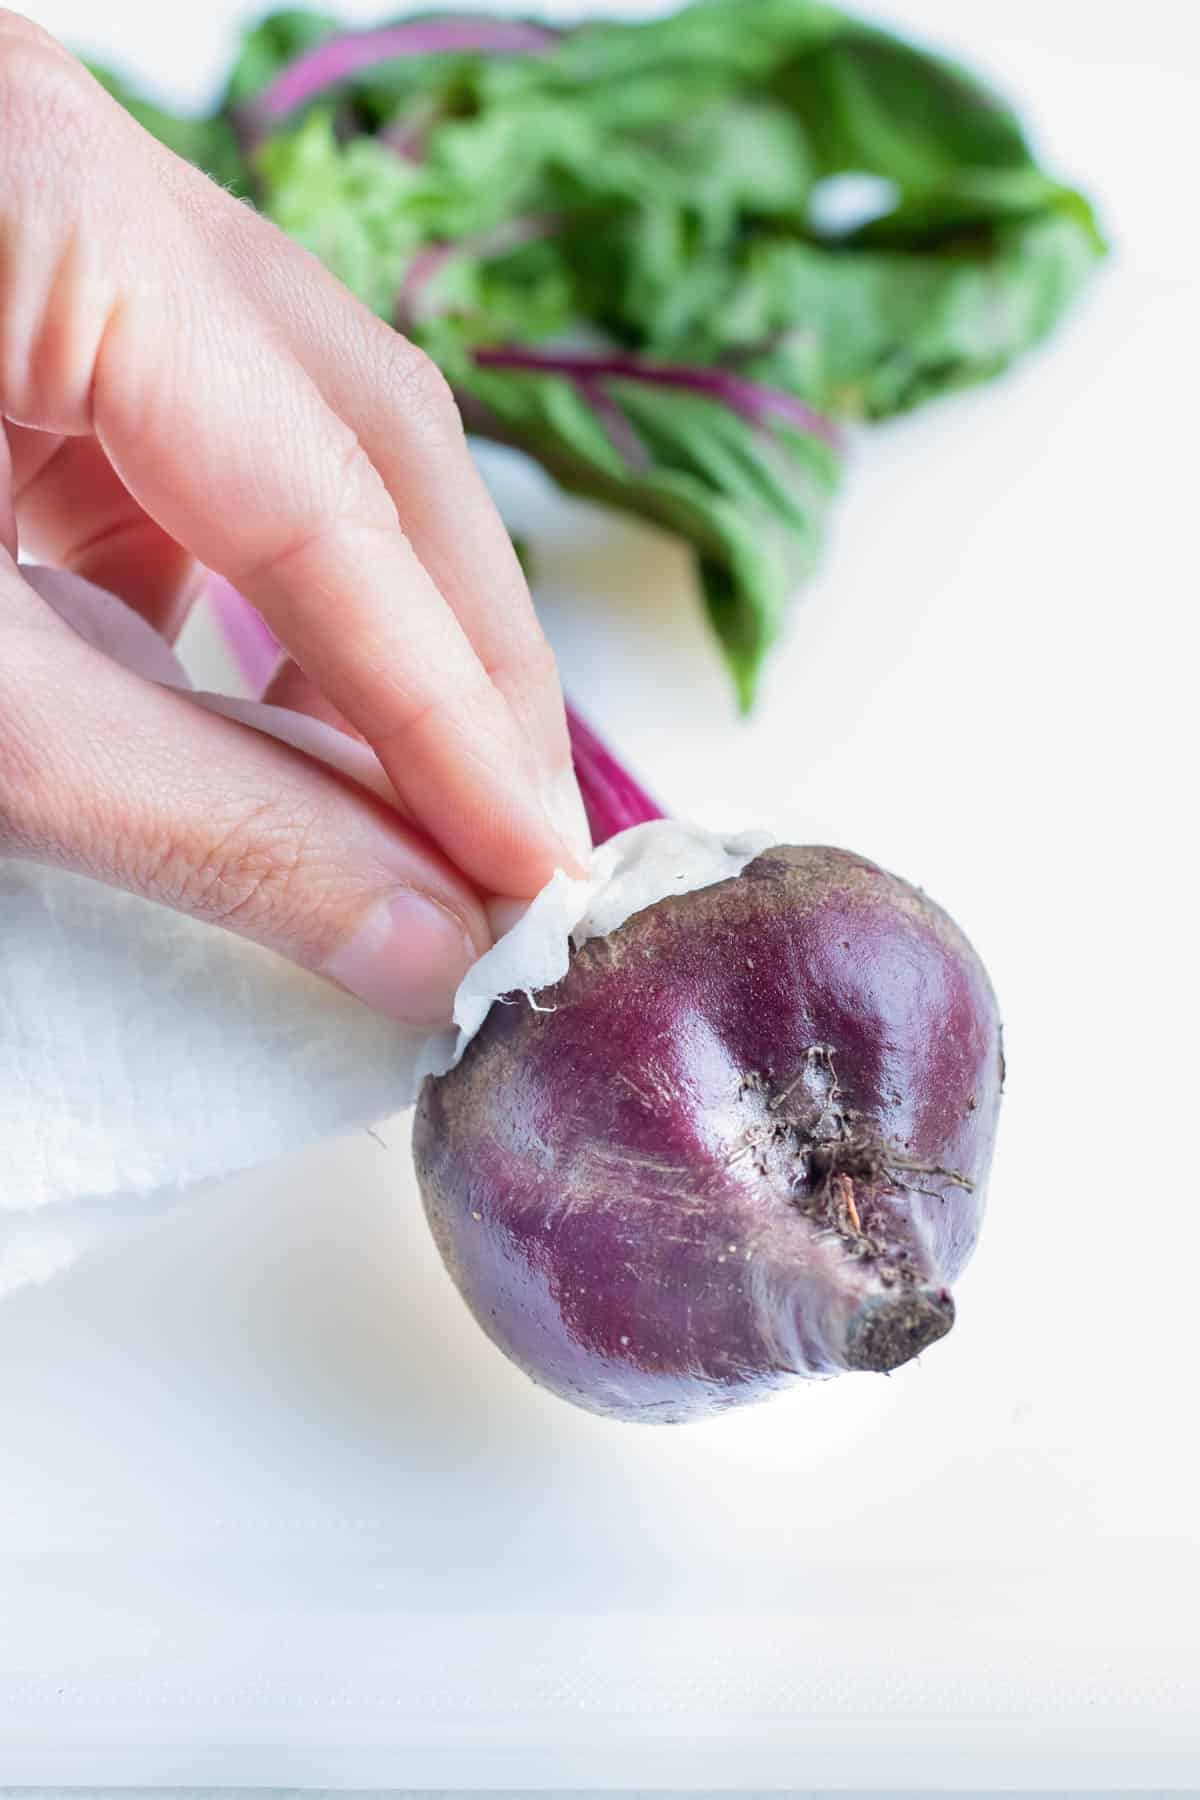 Using a paper towel, remove the stem from the beetroot.